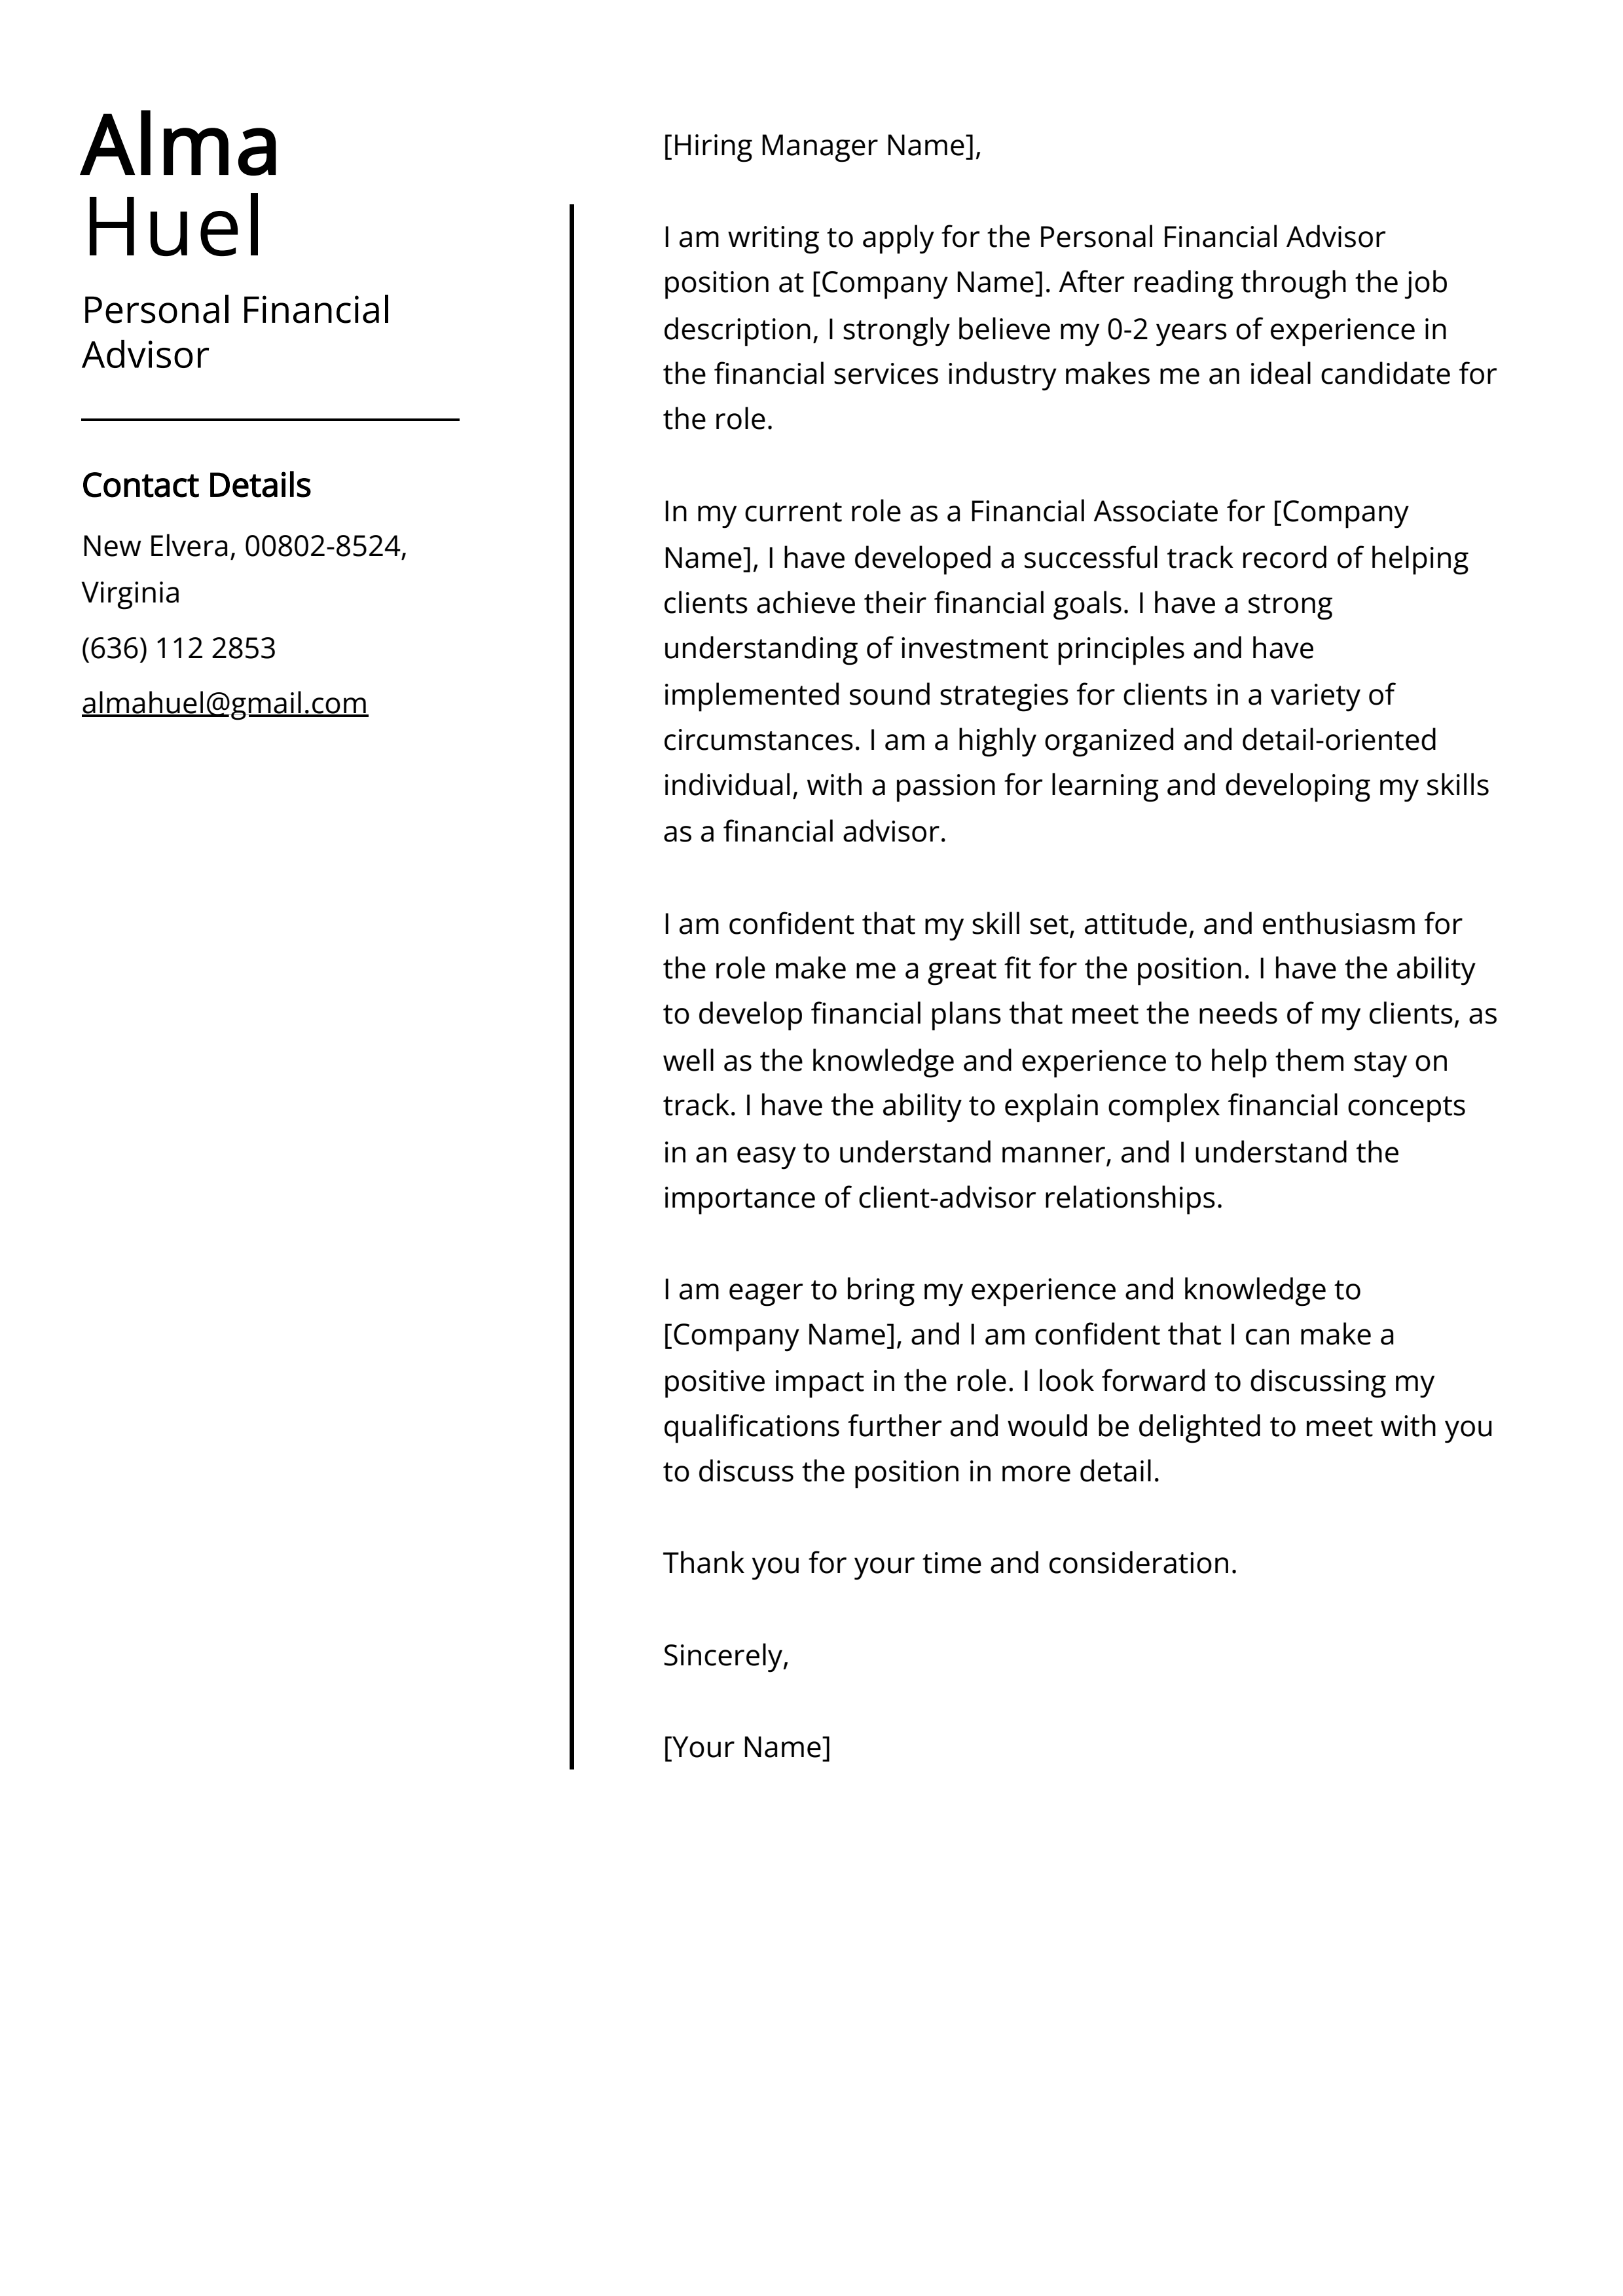 Personal Financial Advisor Cover Letter Example